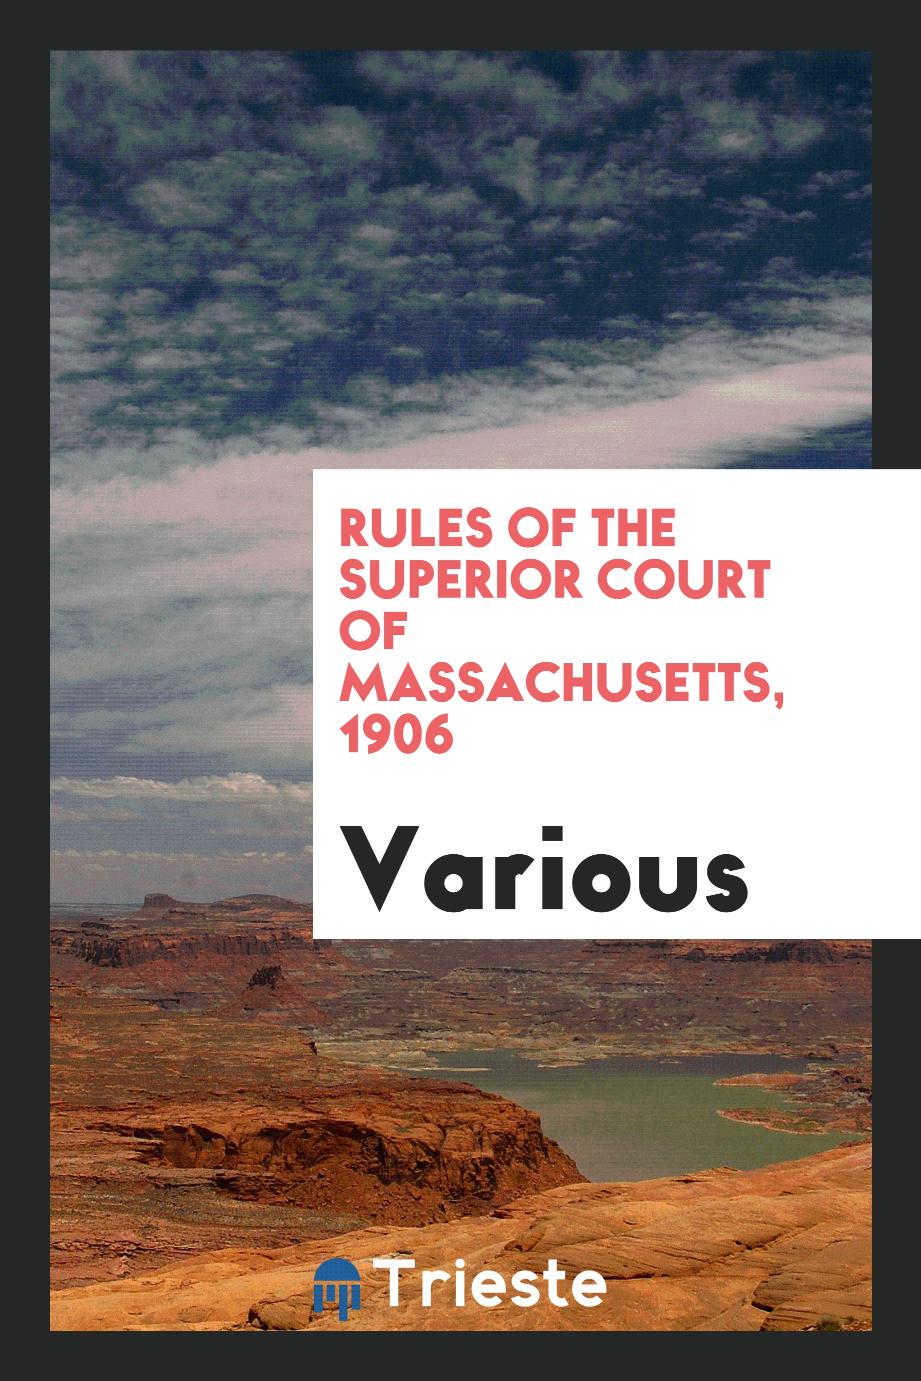 Rules of the Superior Court of Massachusetts, 1906